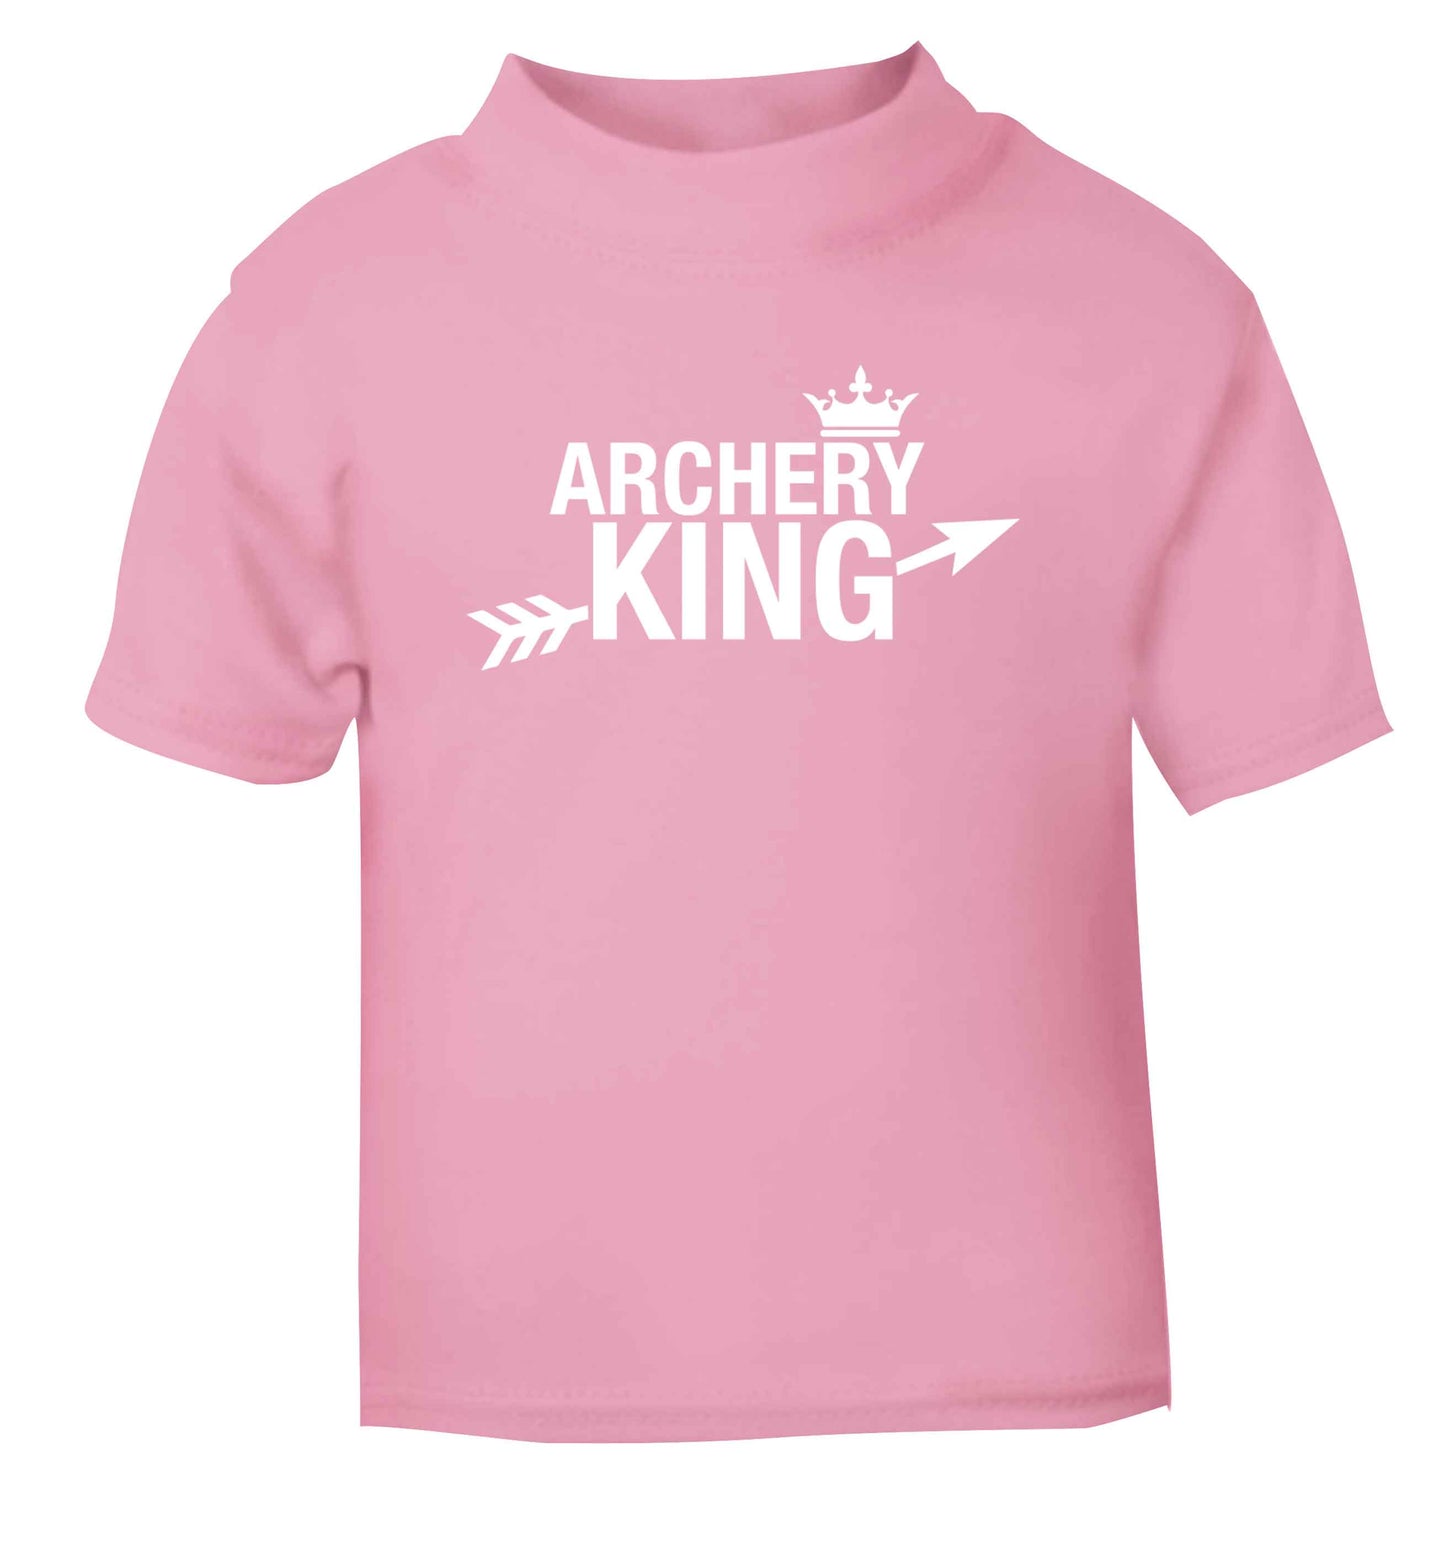 Archery king light pink Baby Toddler Tshirt 2 Years